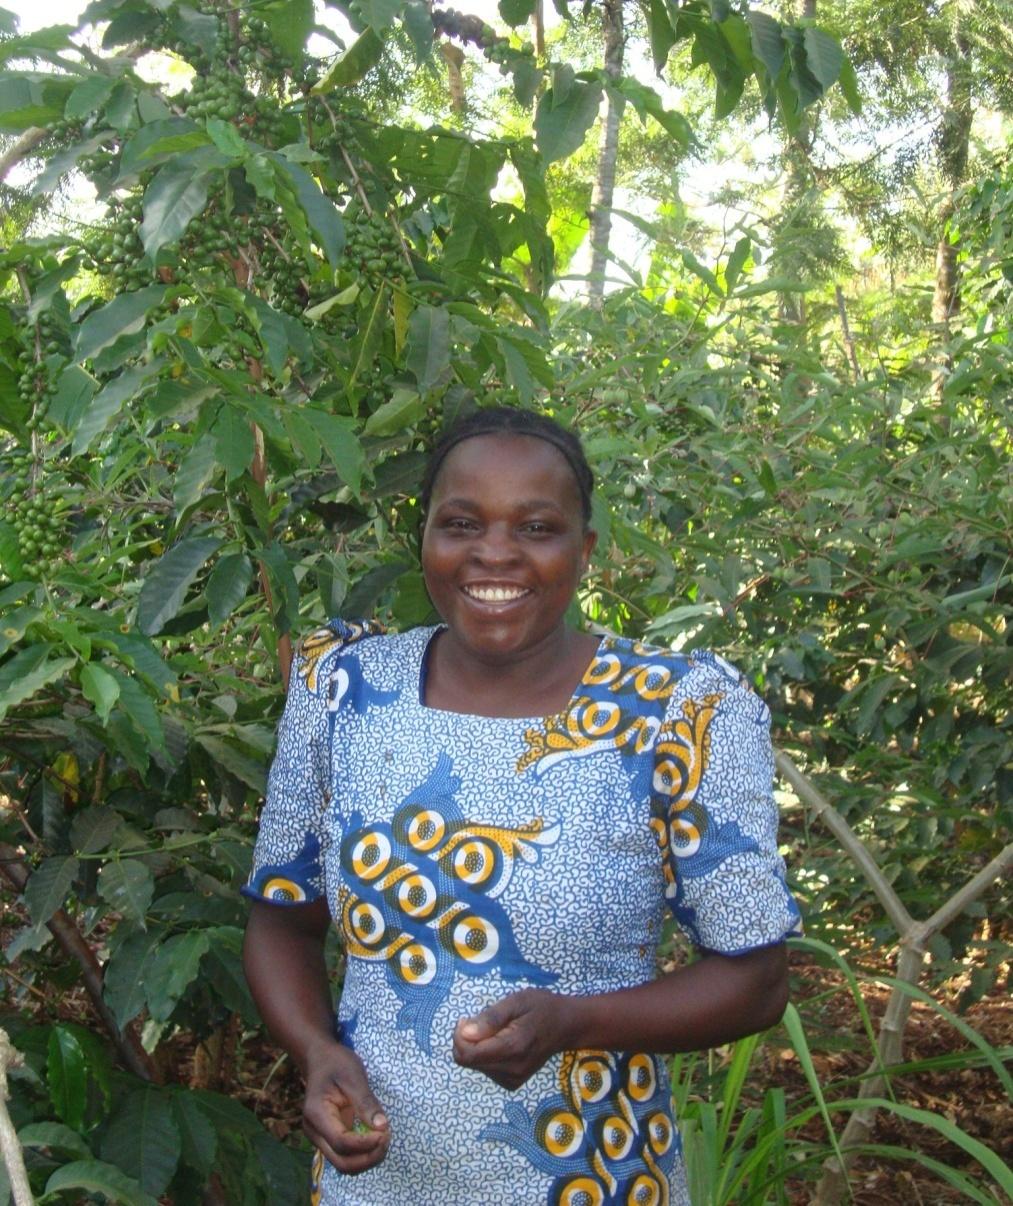 LAST YEAR MARY HARVESTED 106KG FROM HER WELL MANAGED FARM. SHE EXPECTS TO HARVEST 600KG IN 2012.